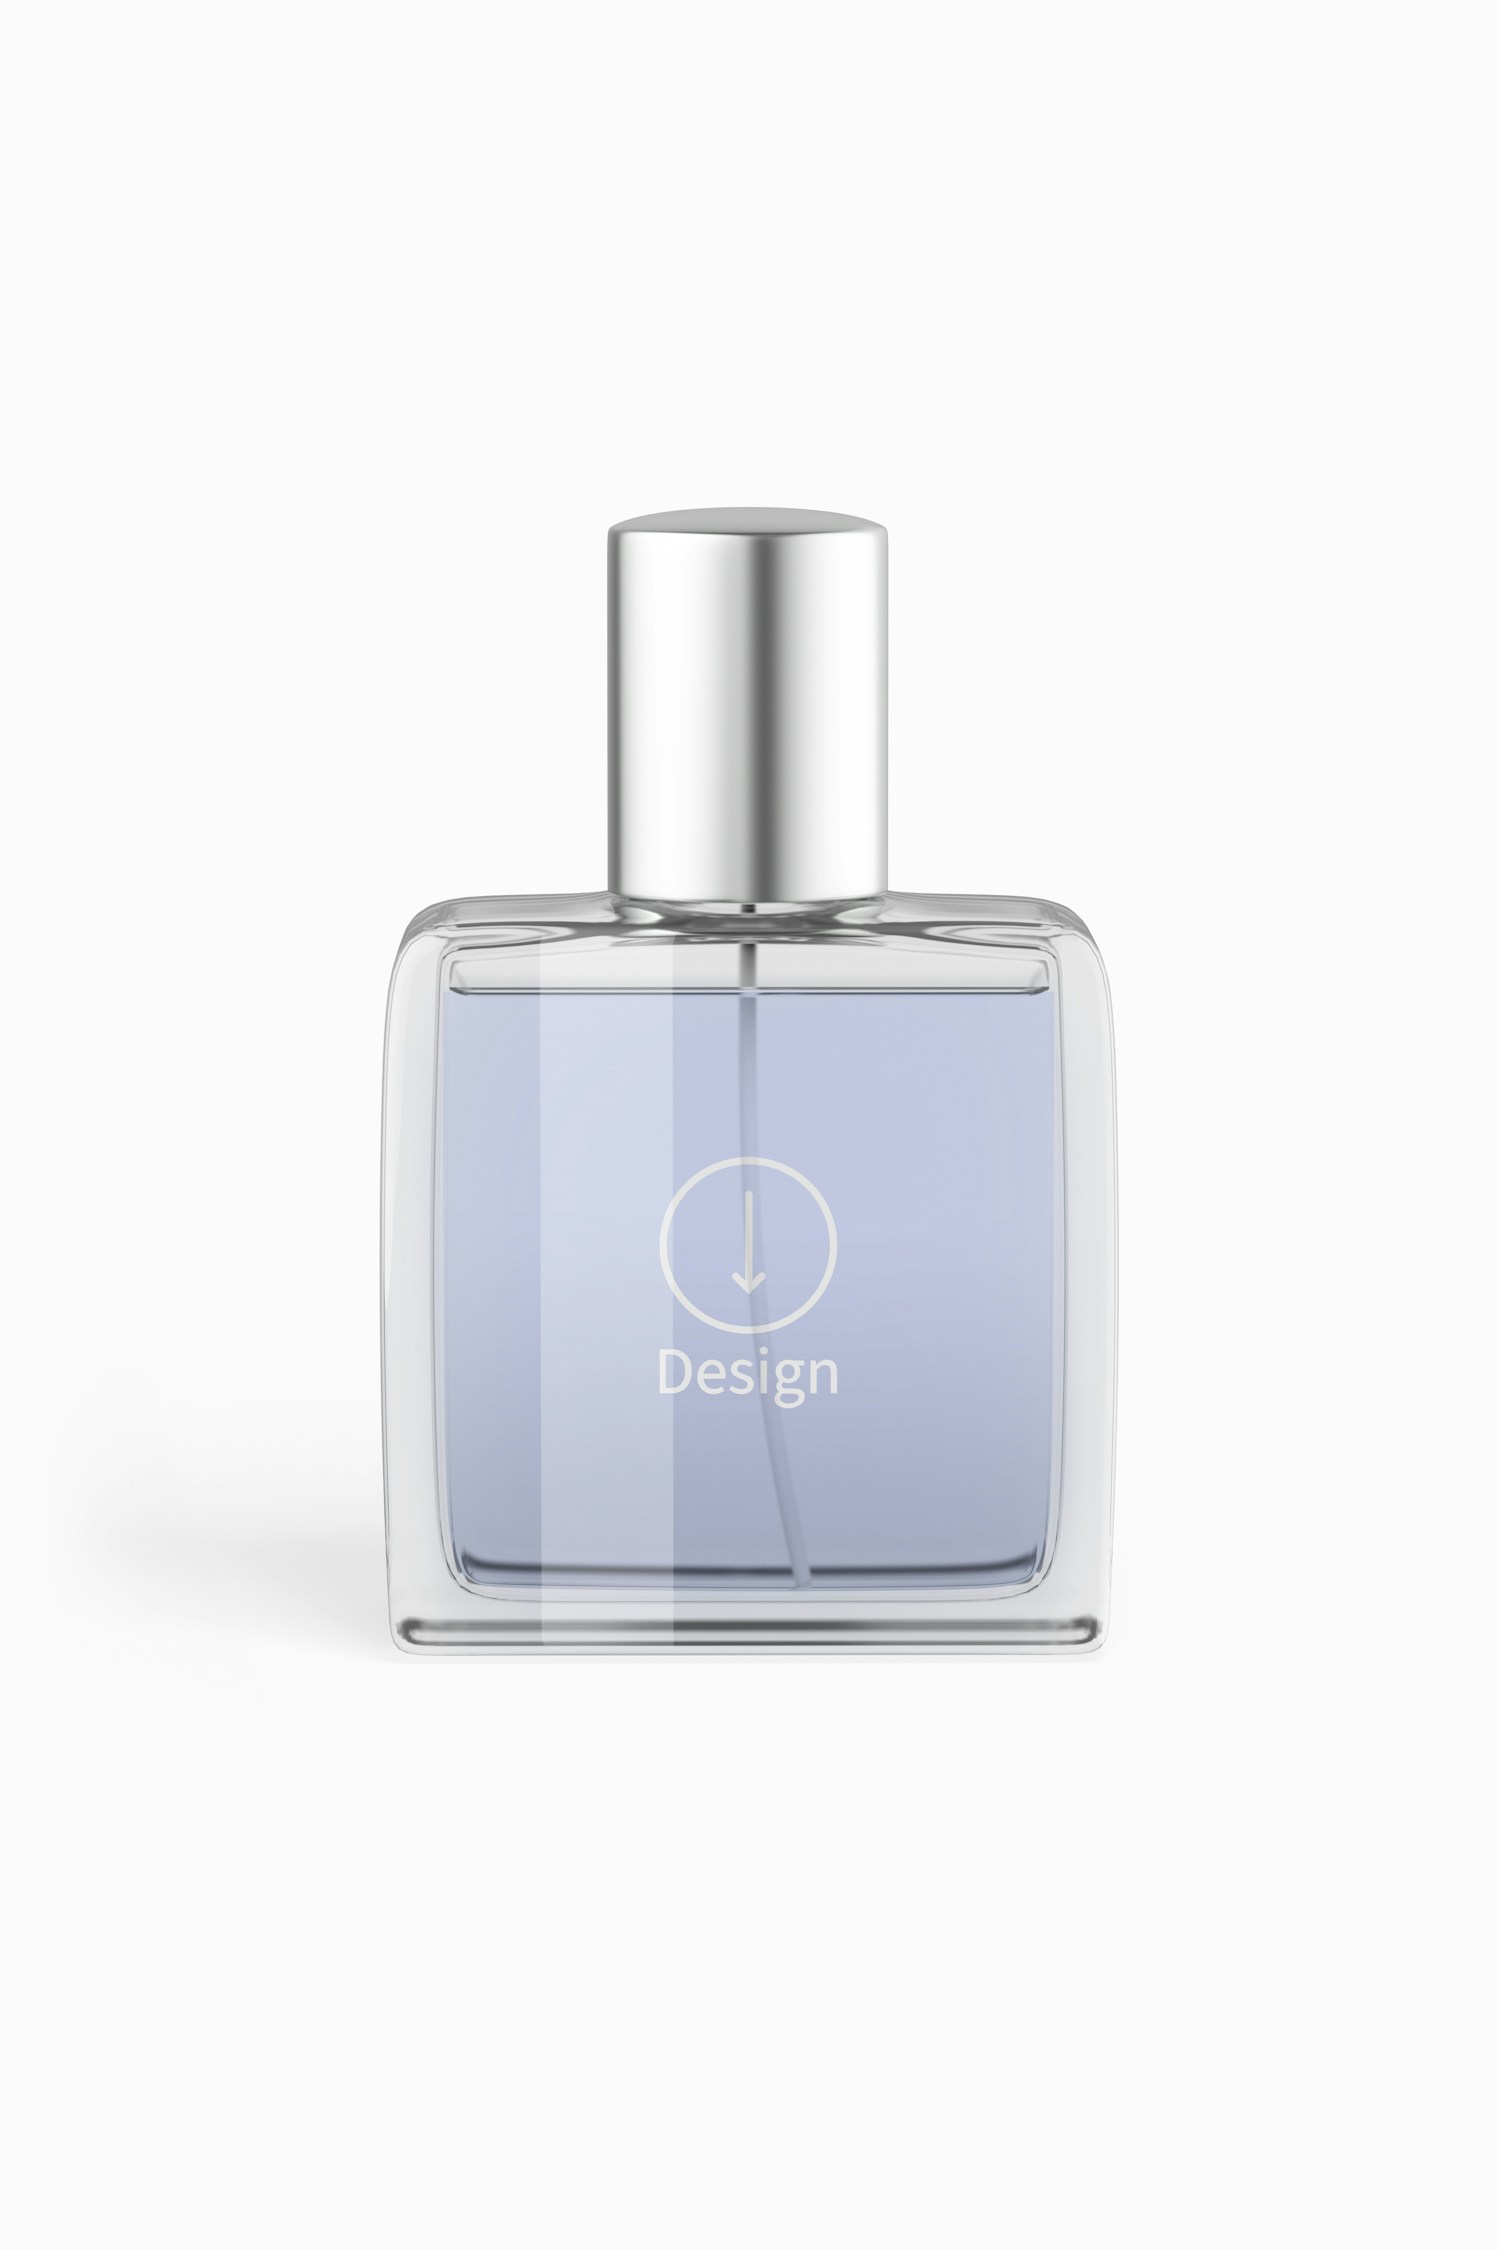 Perfume Bottle Mockup, Front View